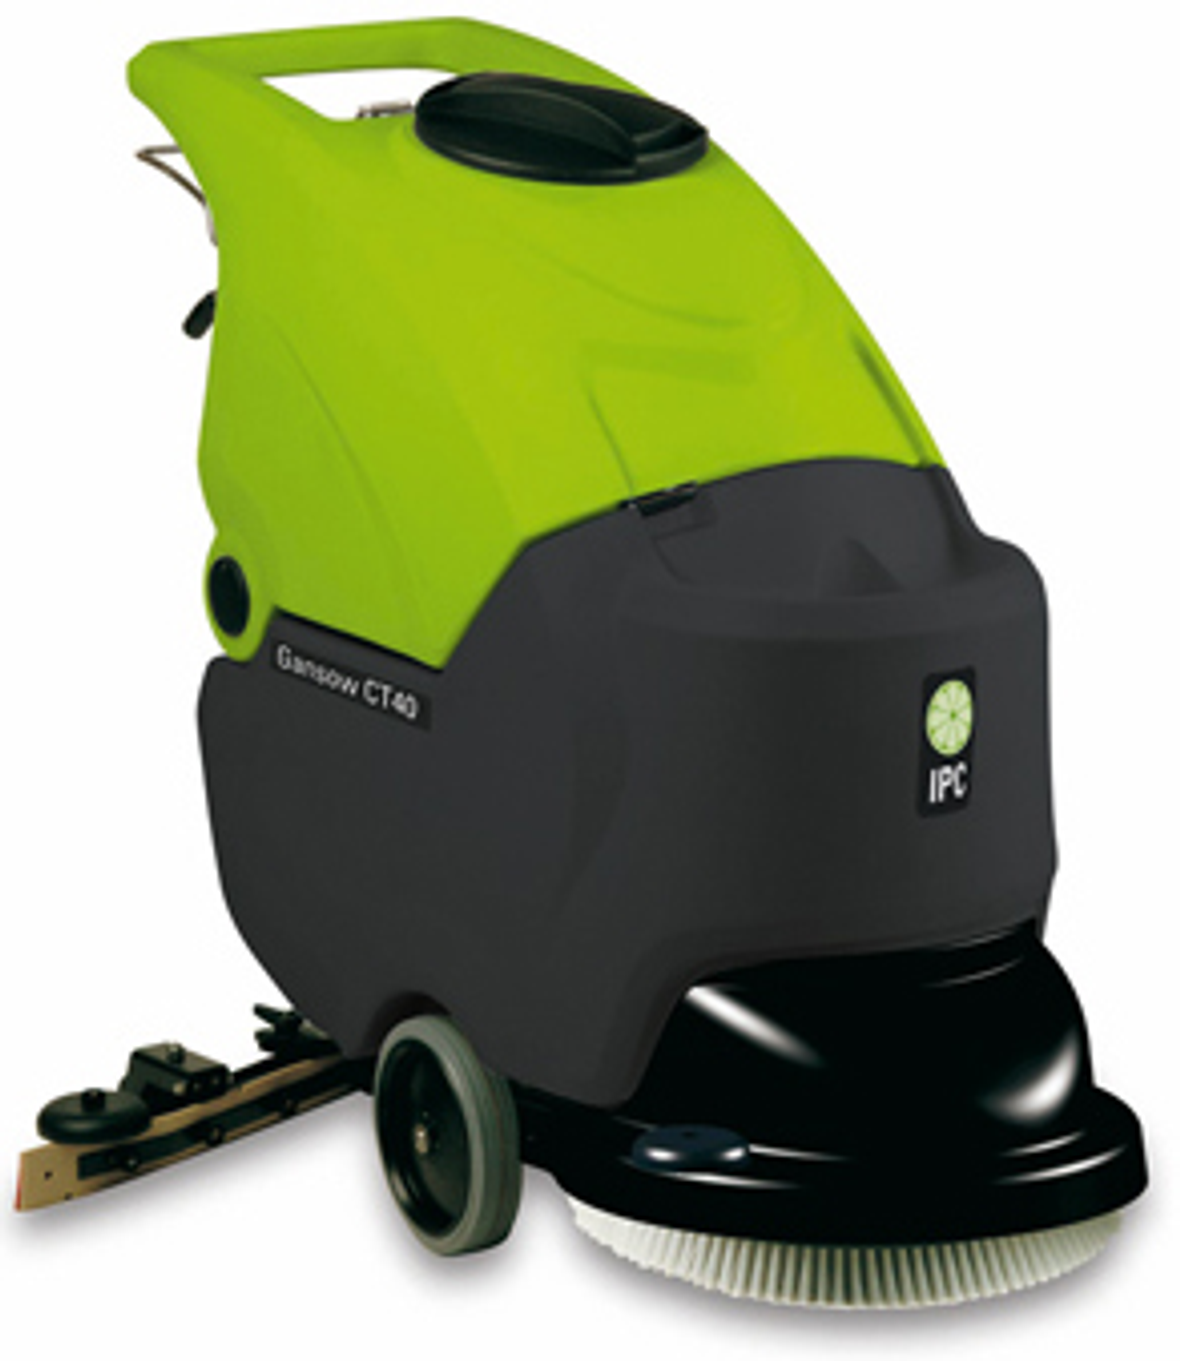 IPC EAGLE CT40BT50-OBC 20" Traction Drive Automatic Scrubber